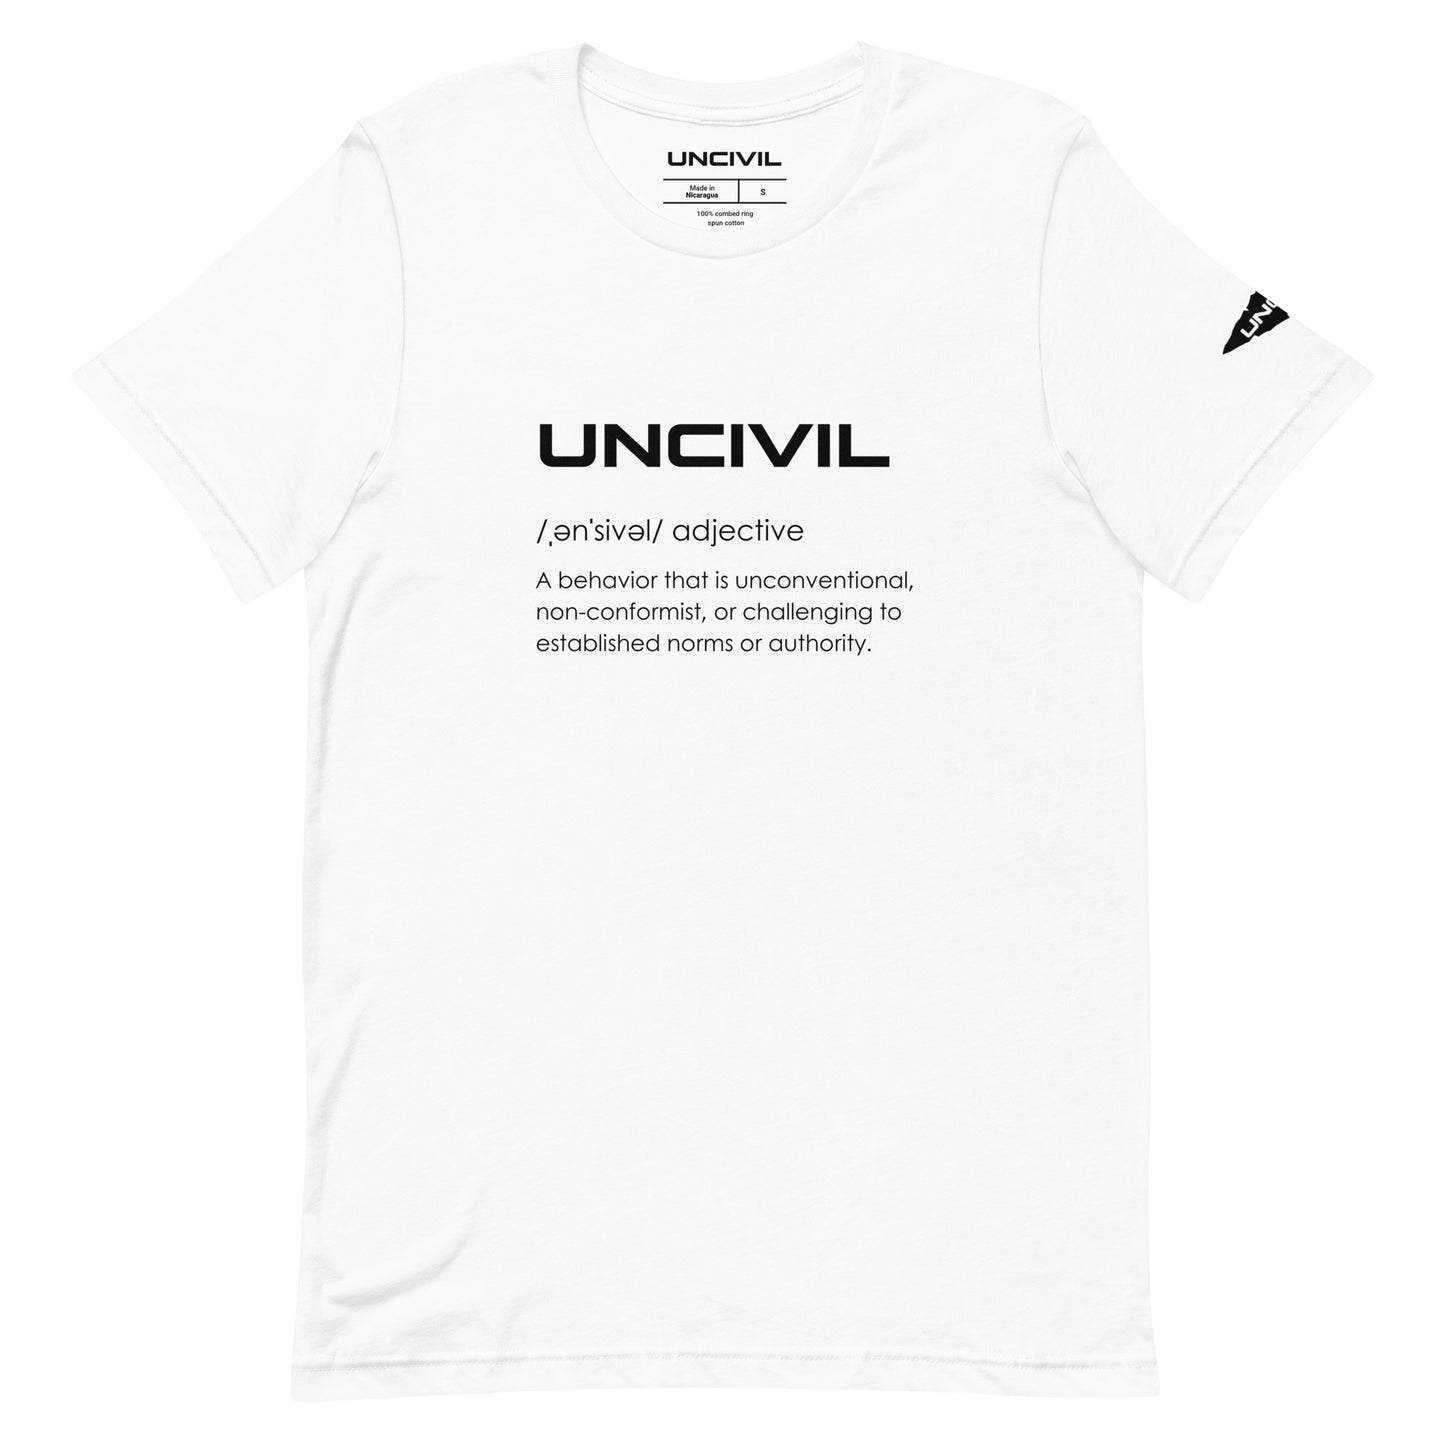 Our UNCIVIL Tee, it's what we stand for. UNCIVIL is a behavior that in unconventional, non-conformist, or challenging to established norms or authority. White shirt.